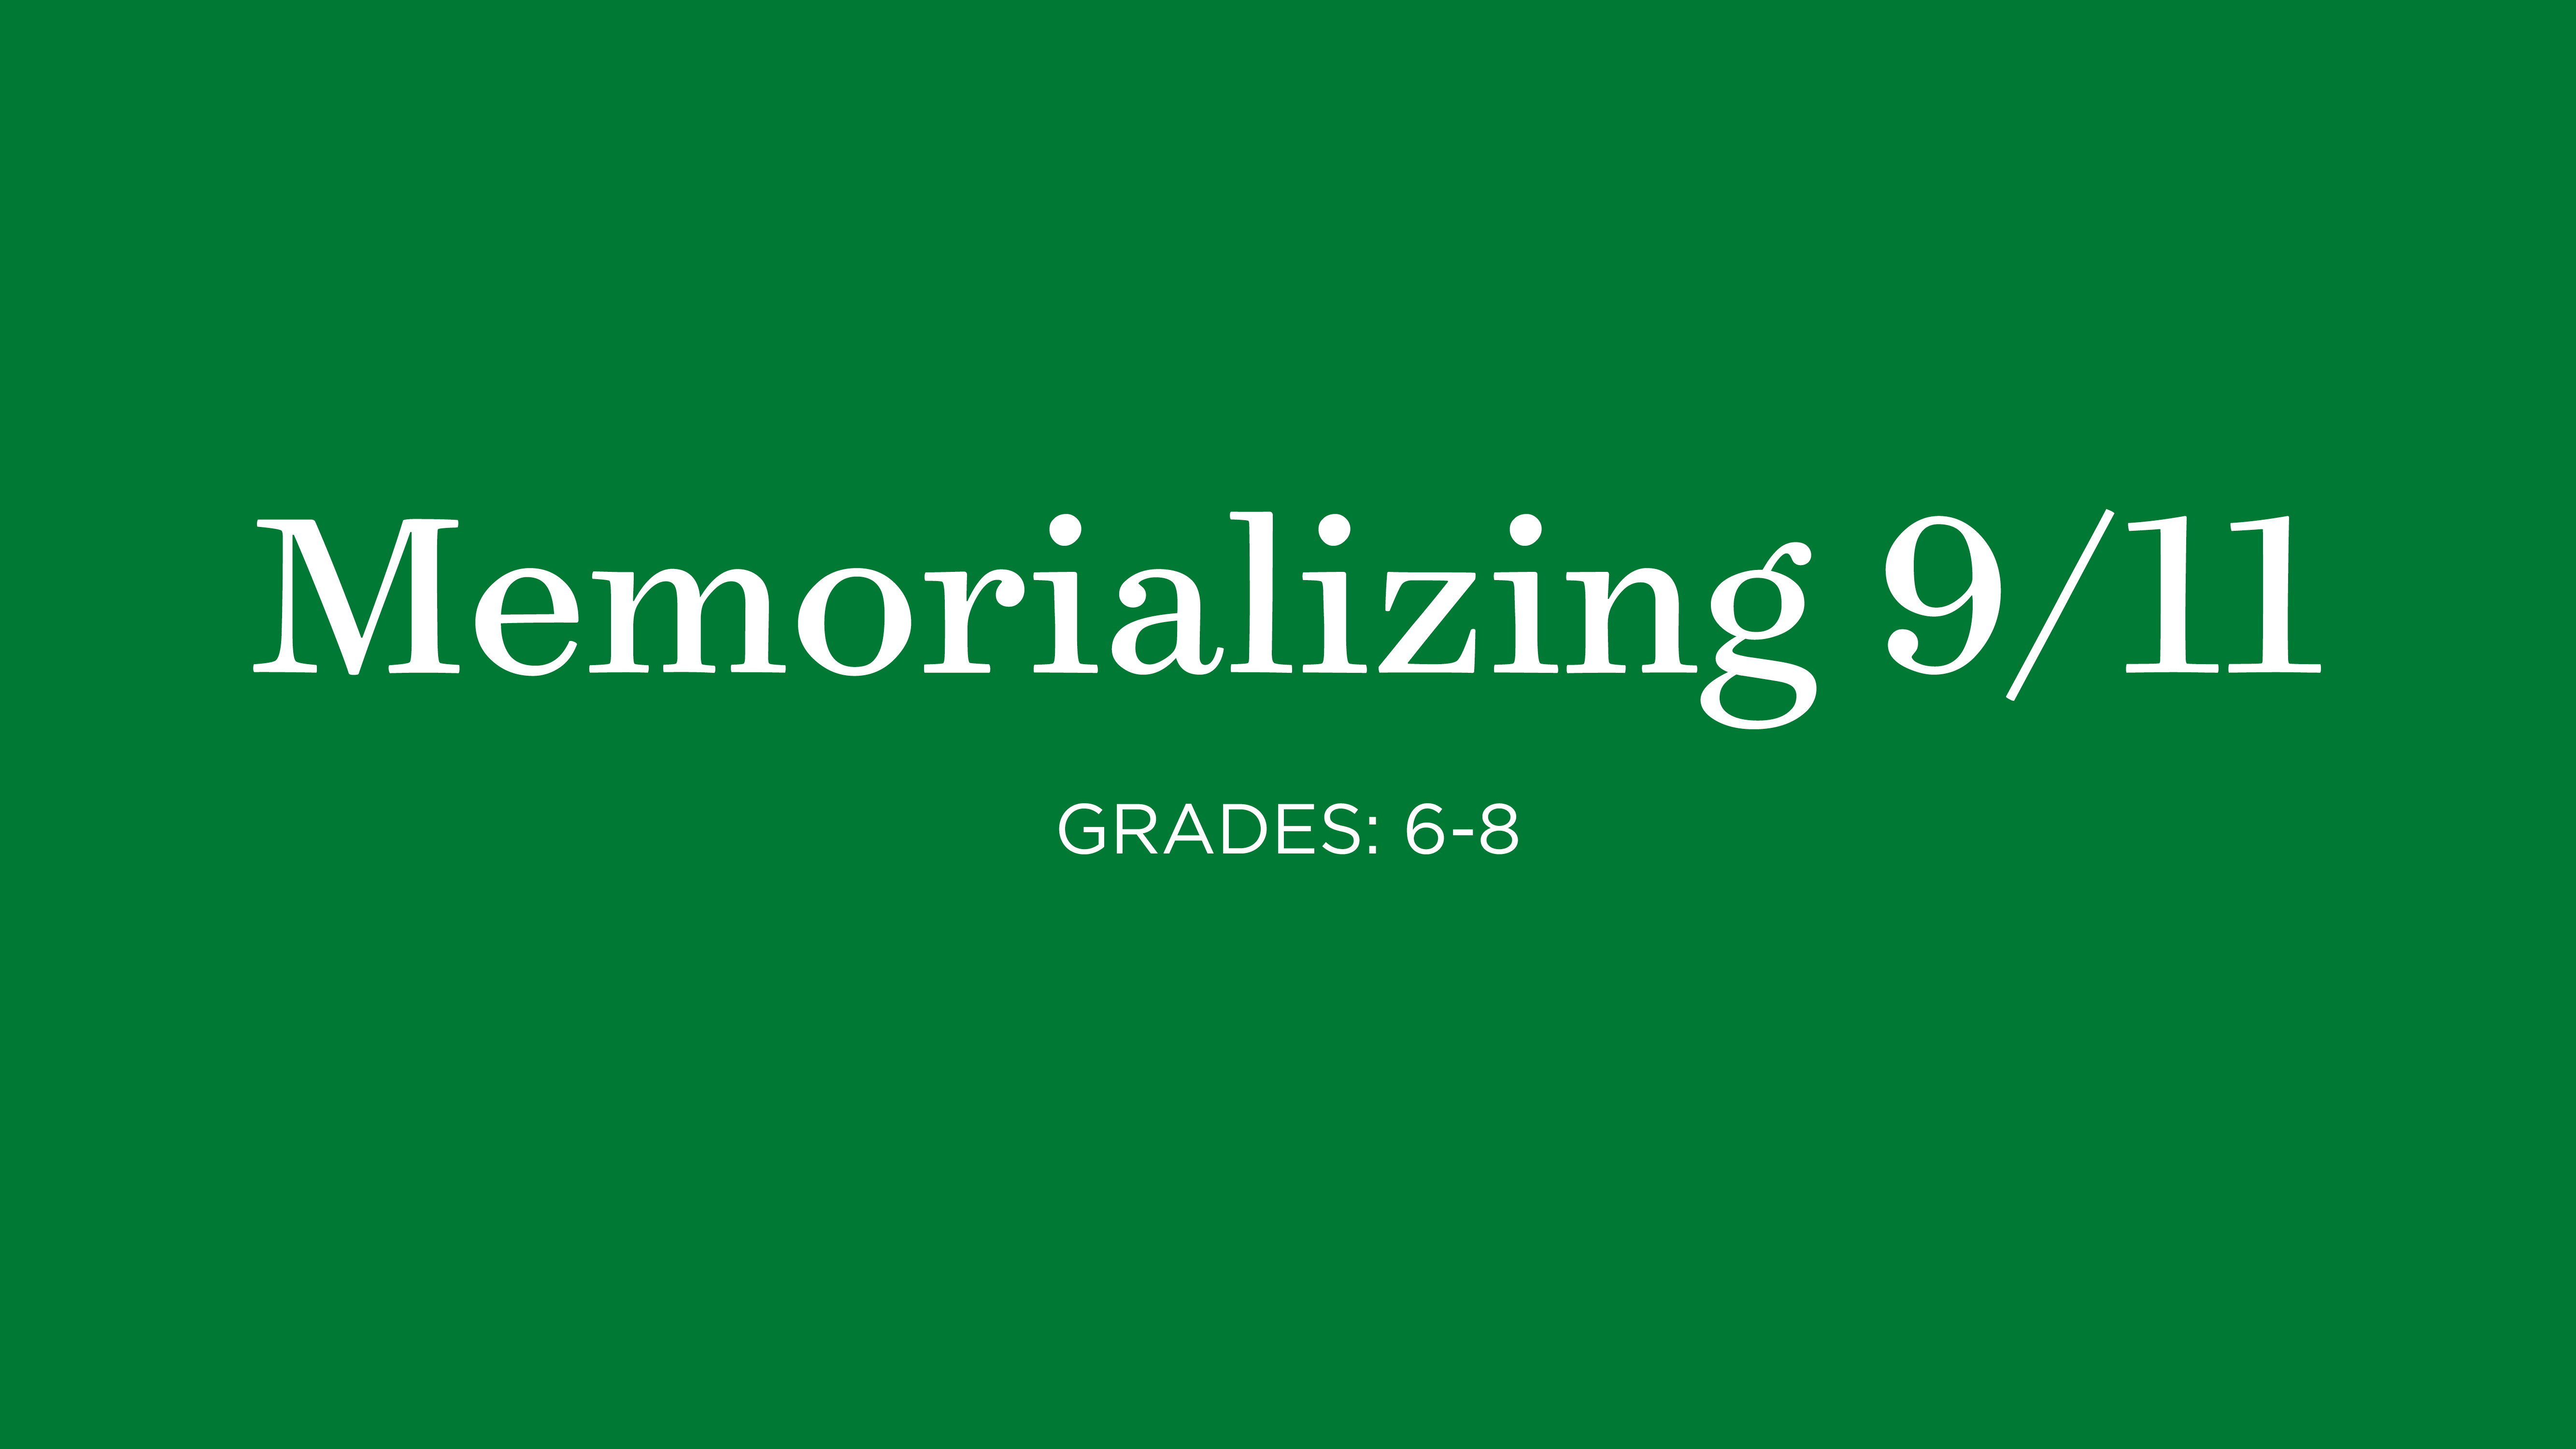 Green square with the words "Memorializing 9/11" Grades 6-8